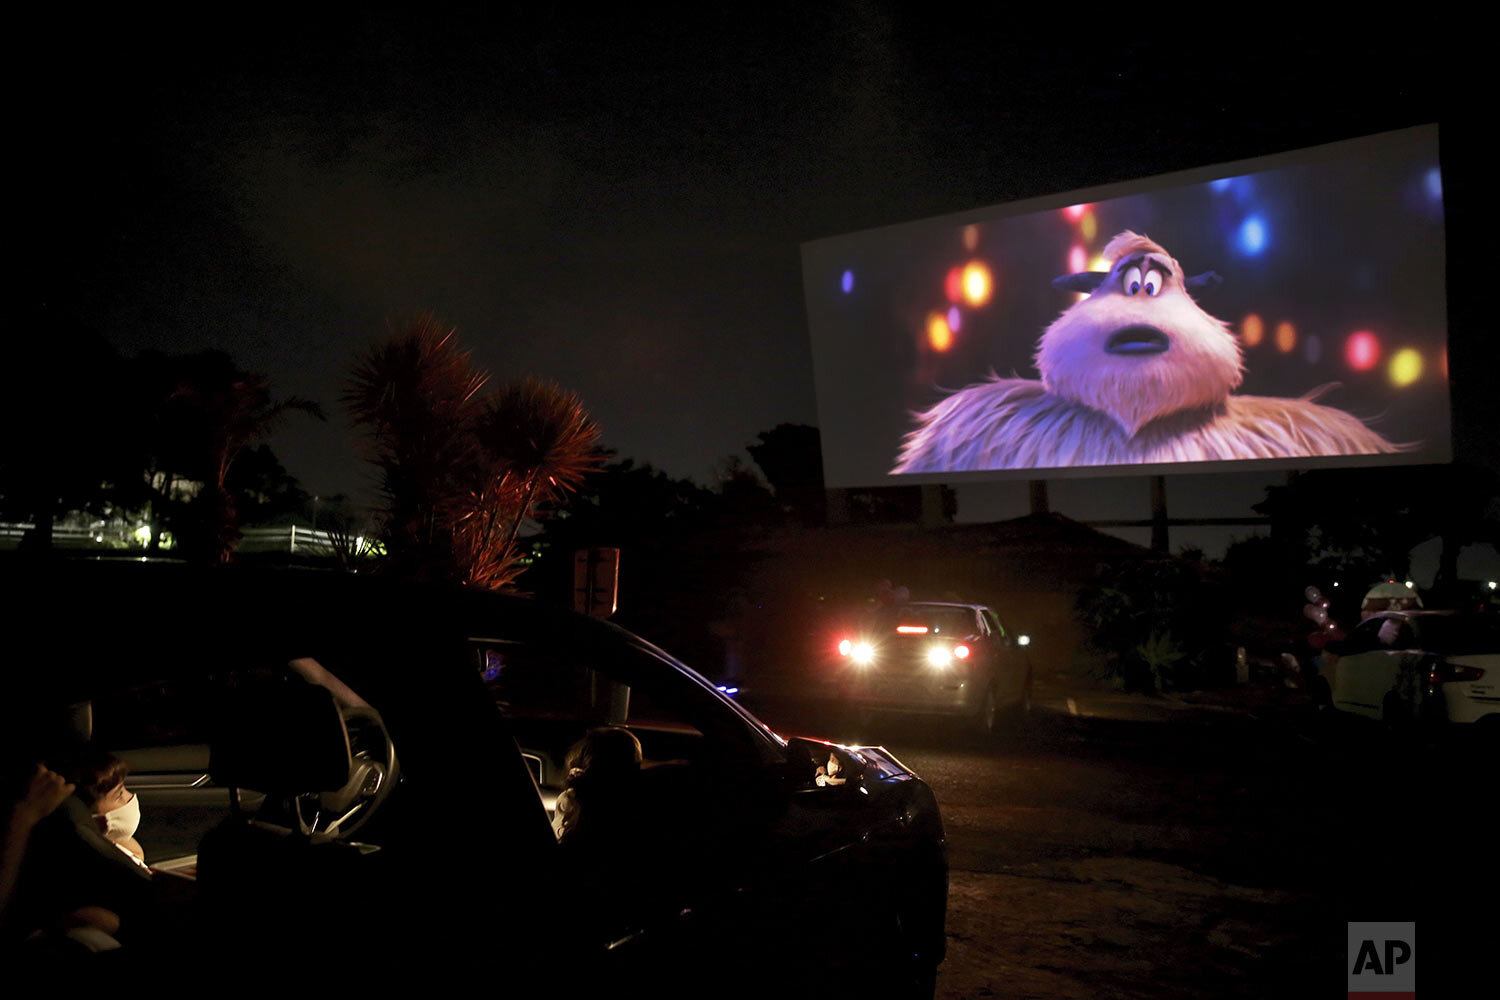  A family wearing face masks watches a movie at a drive-in where drivers must leave one space empty between them amid the spread of the new coronavirus in Brasilia, Brazil, Wednesday, May 13, 2020. (AP Photo/Eraldo Peres) 